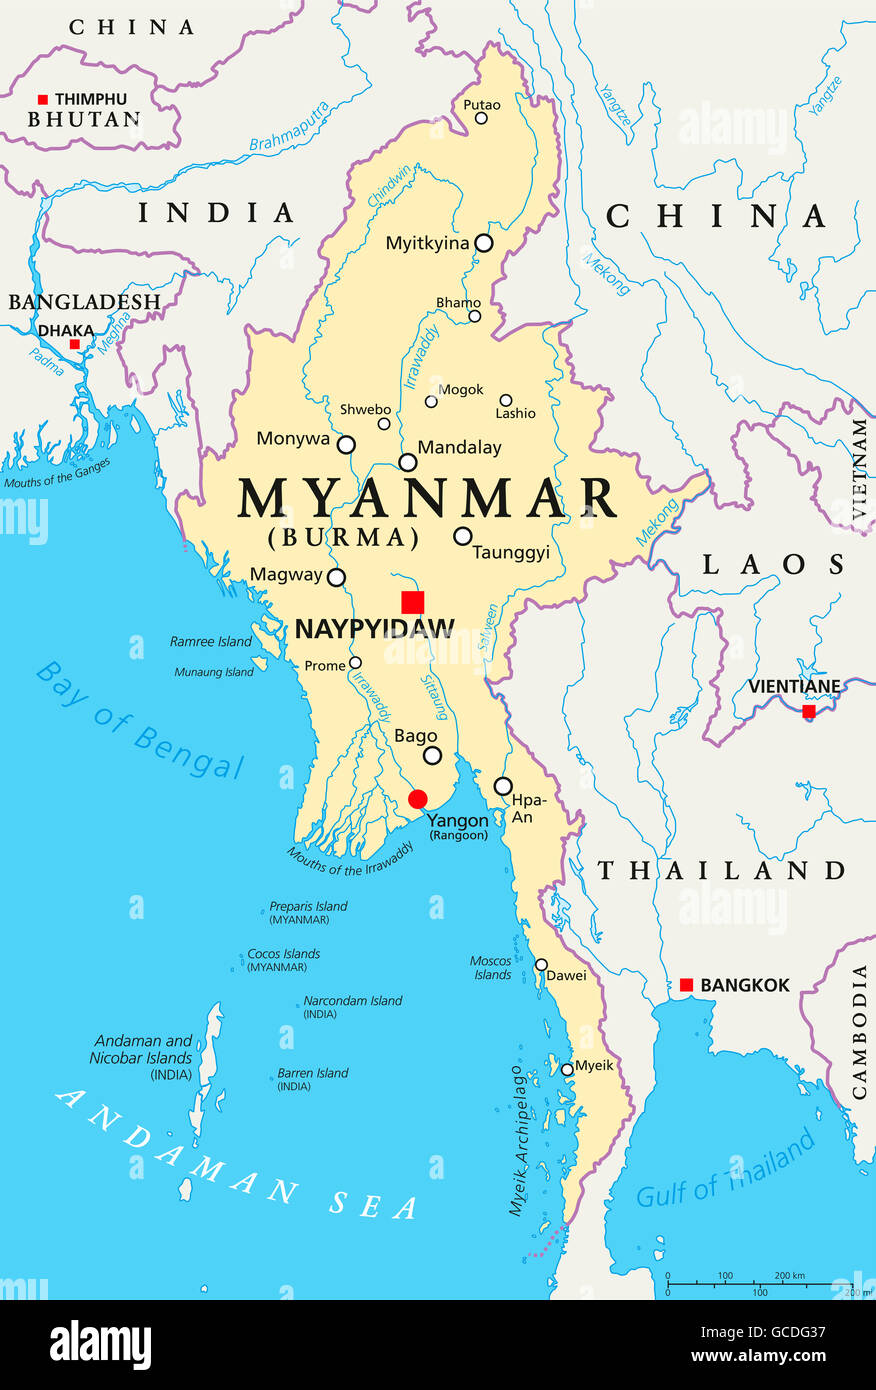 Myanmar political map with capital Naypyidaw, national borders, important cities, rivers and lakes. Also called Burma. Stock Photo